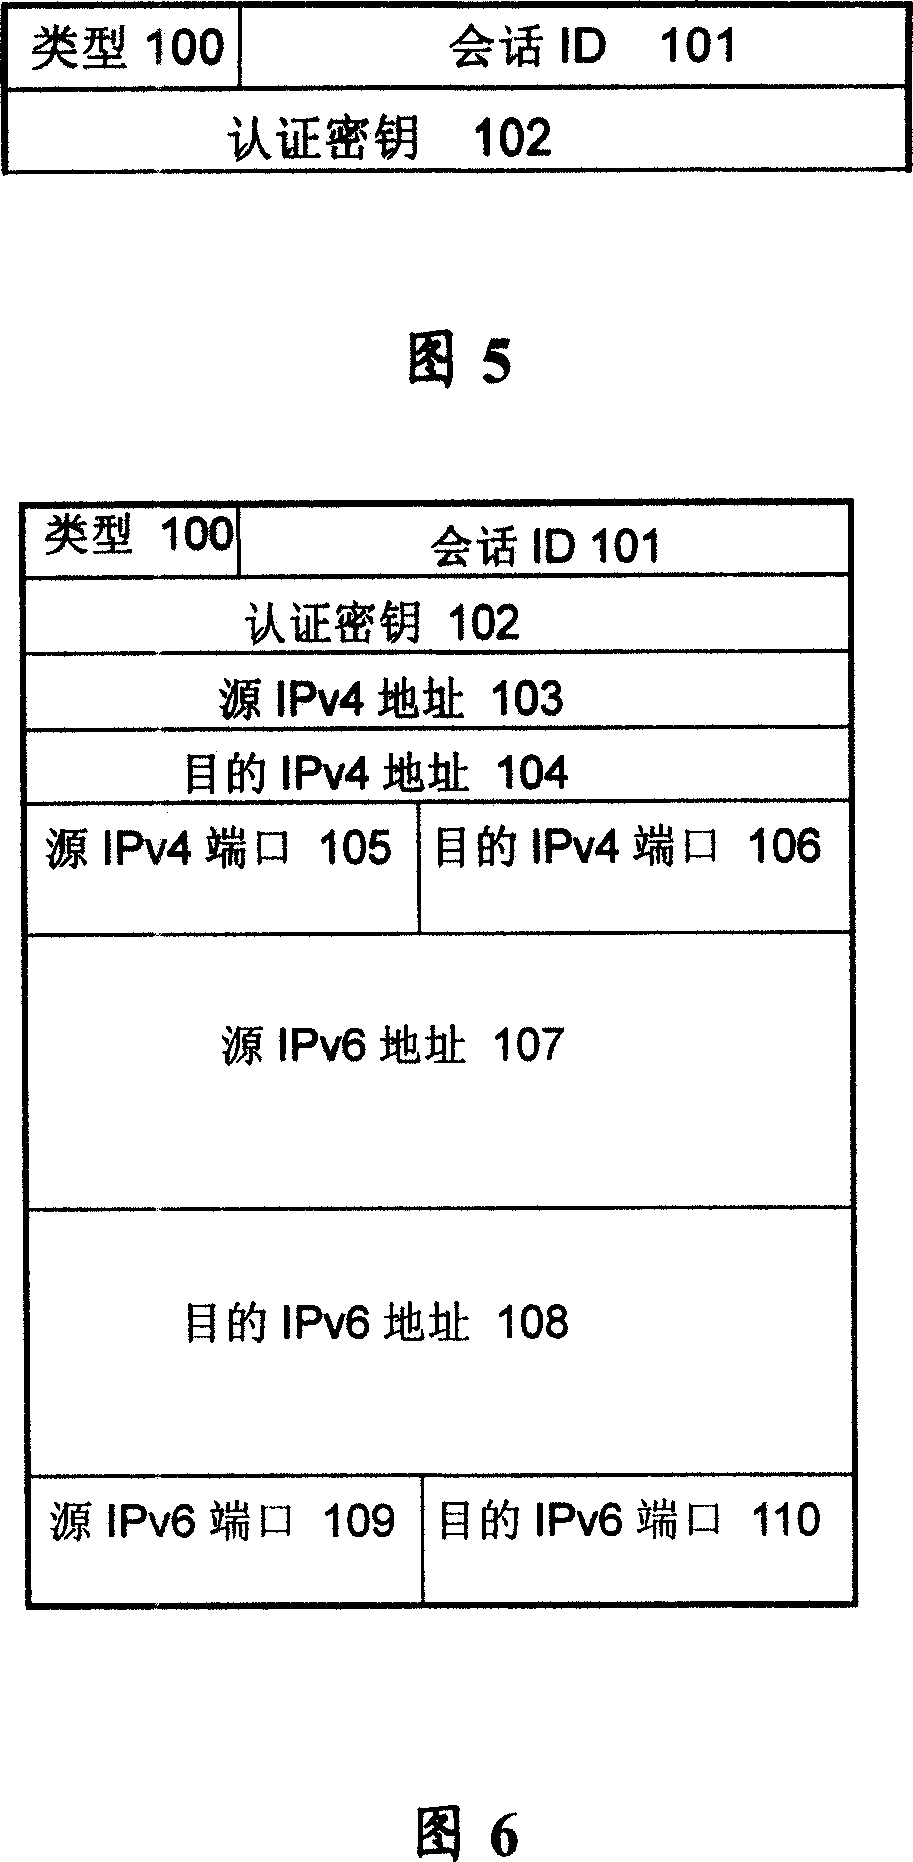 Network address and protocol translating equipment and application layer gateway equipment